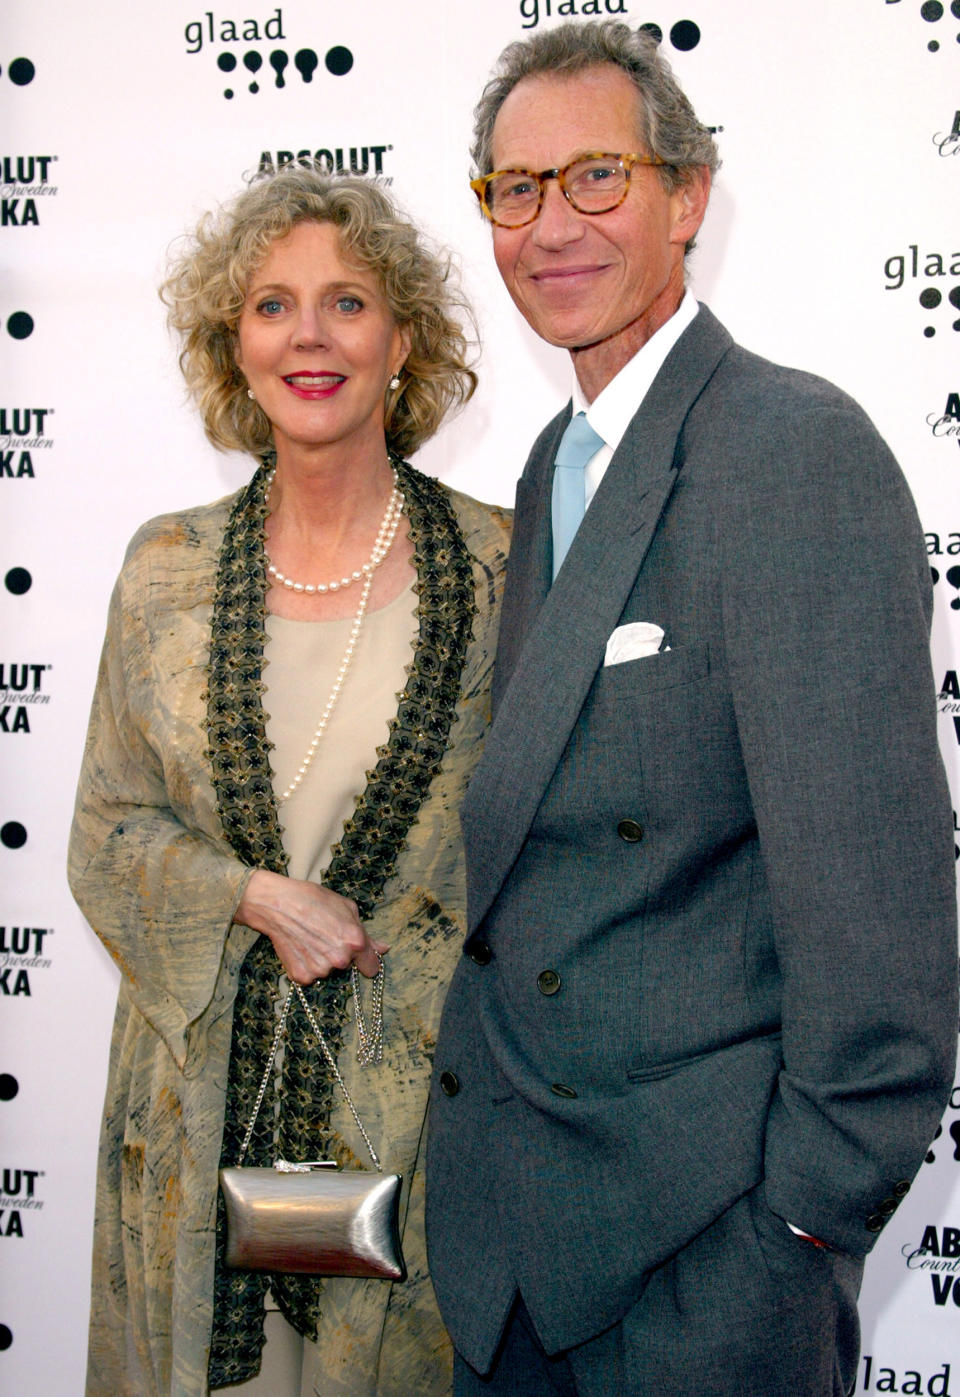 Blythe Danner and Bruce Paltrow during The 13th Annual GLAAD Media Awards in Los Angeles. (Ron Galella Collection via Getty Images)